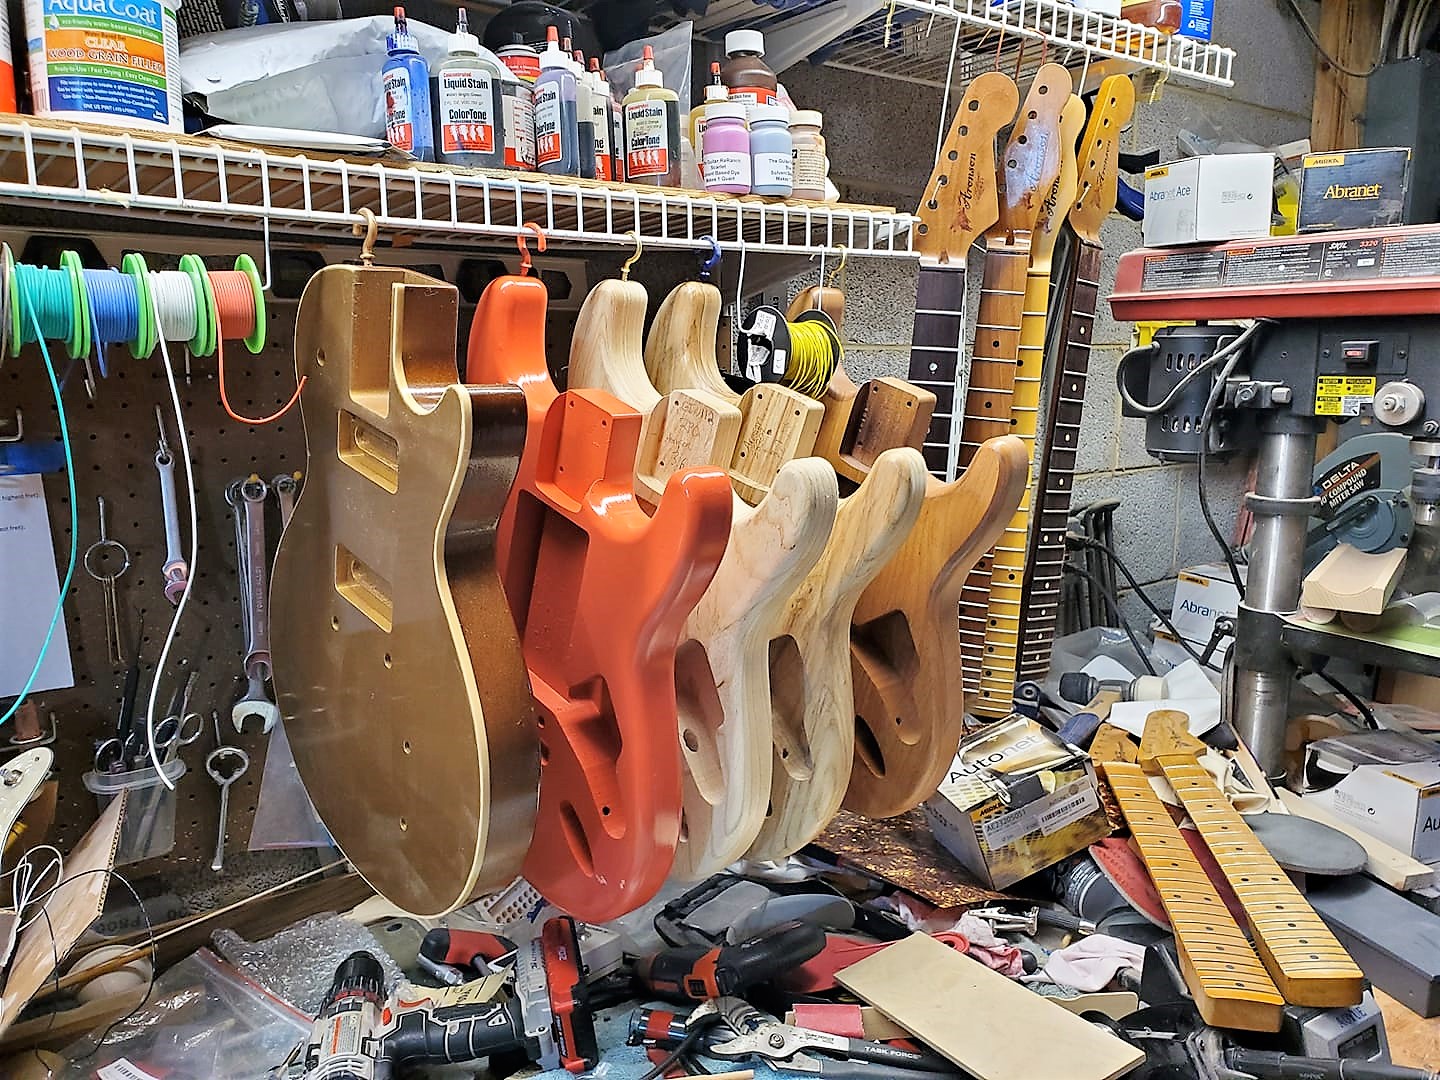 Mike Aronson's work bench with guitar bodies and guitar parts